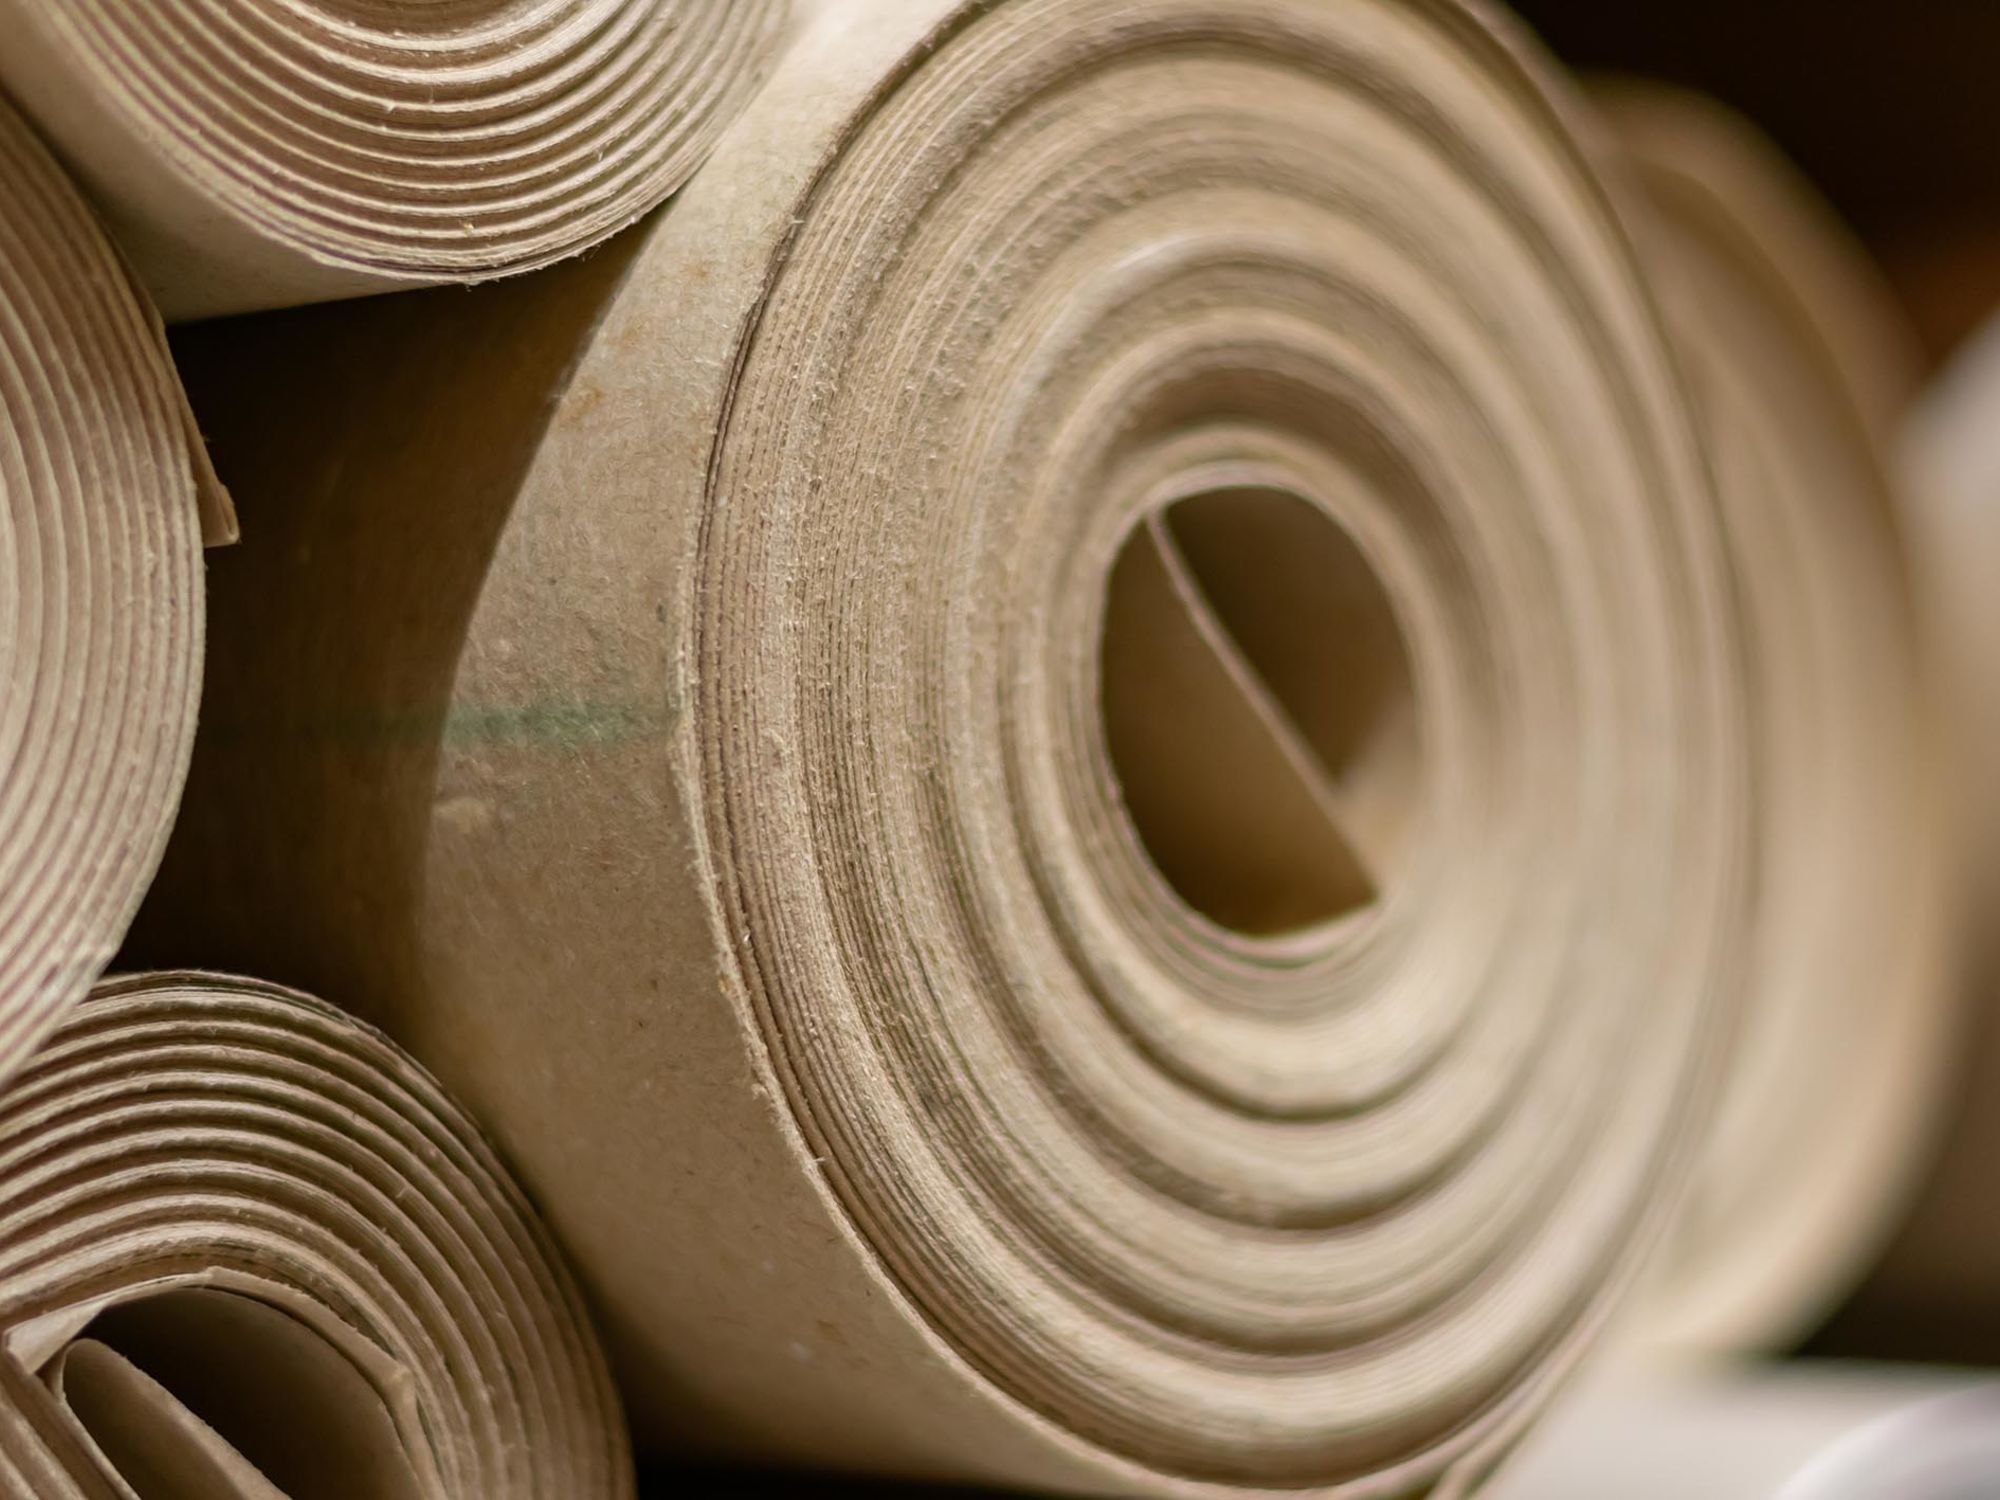 Everything You Should Know About Packing Paper Before Your Move